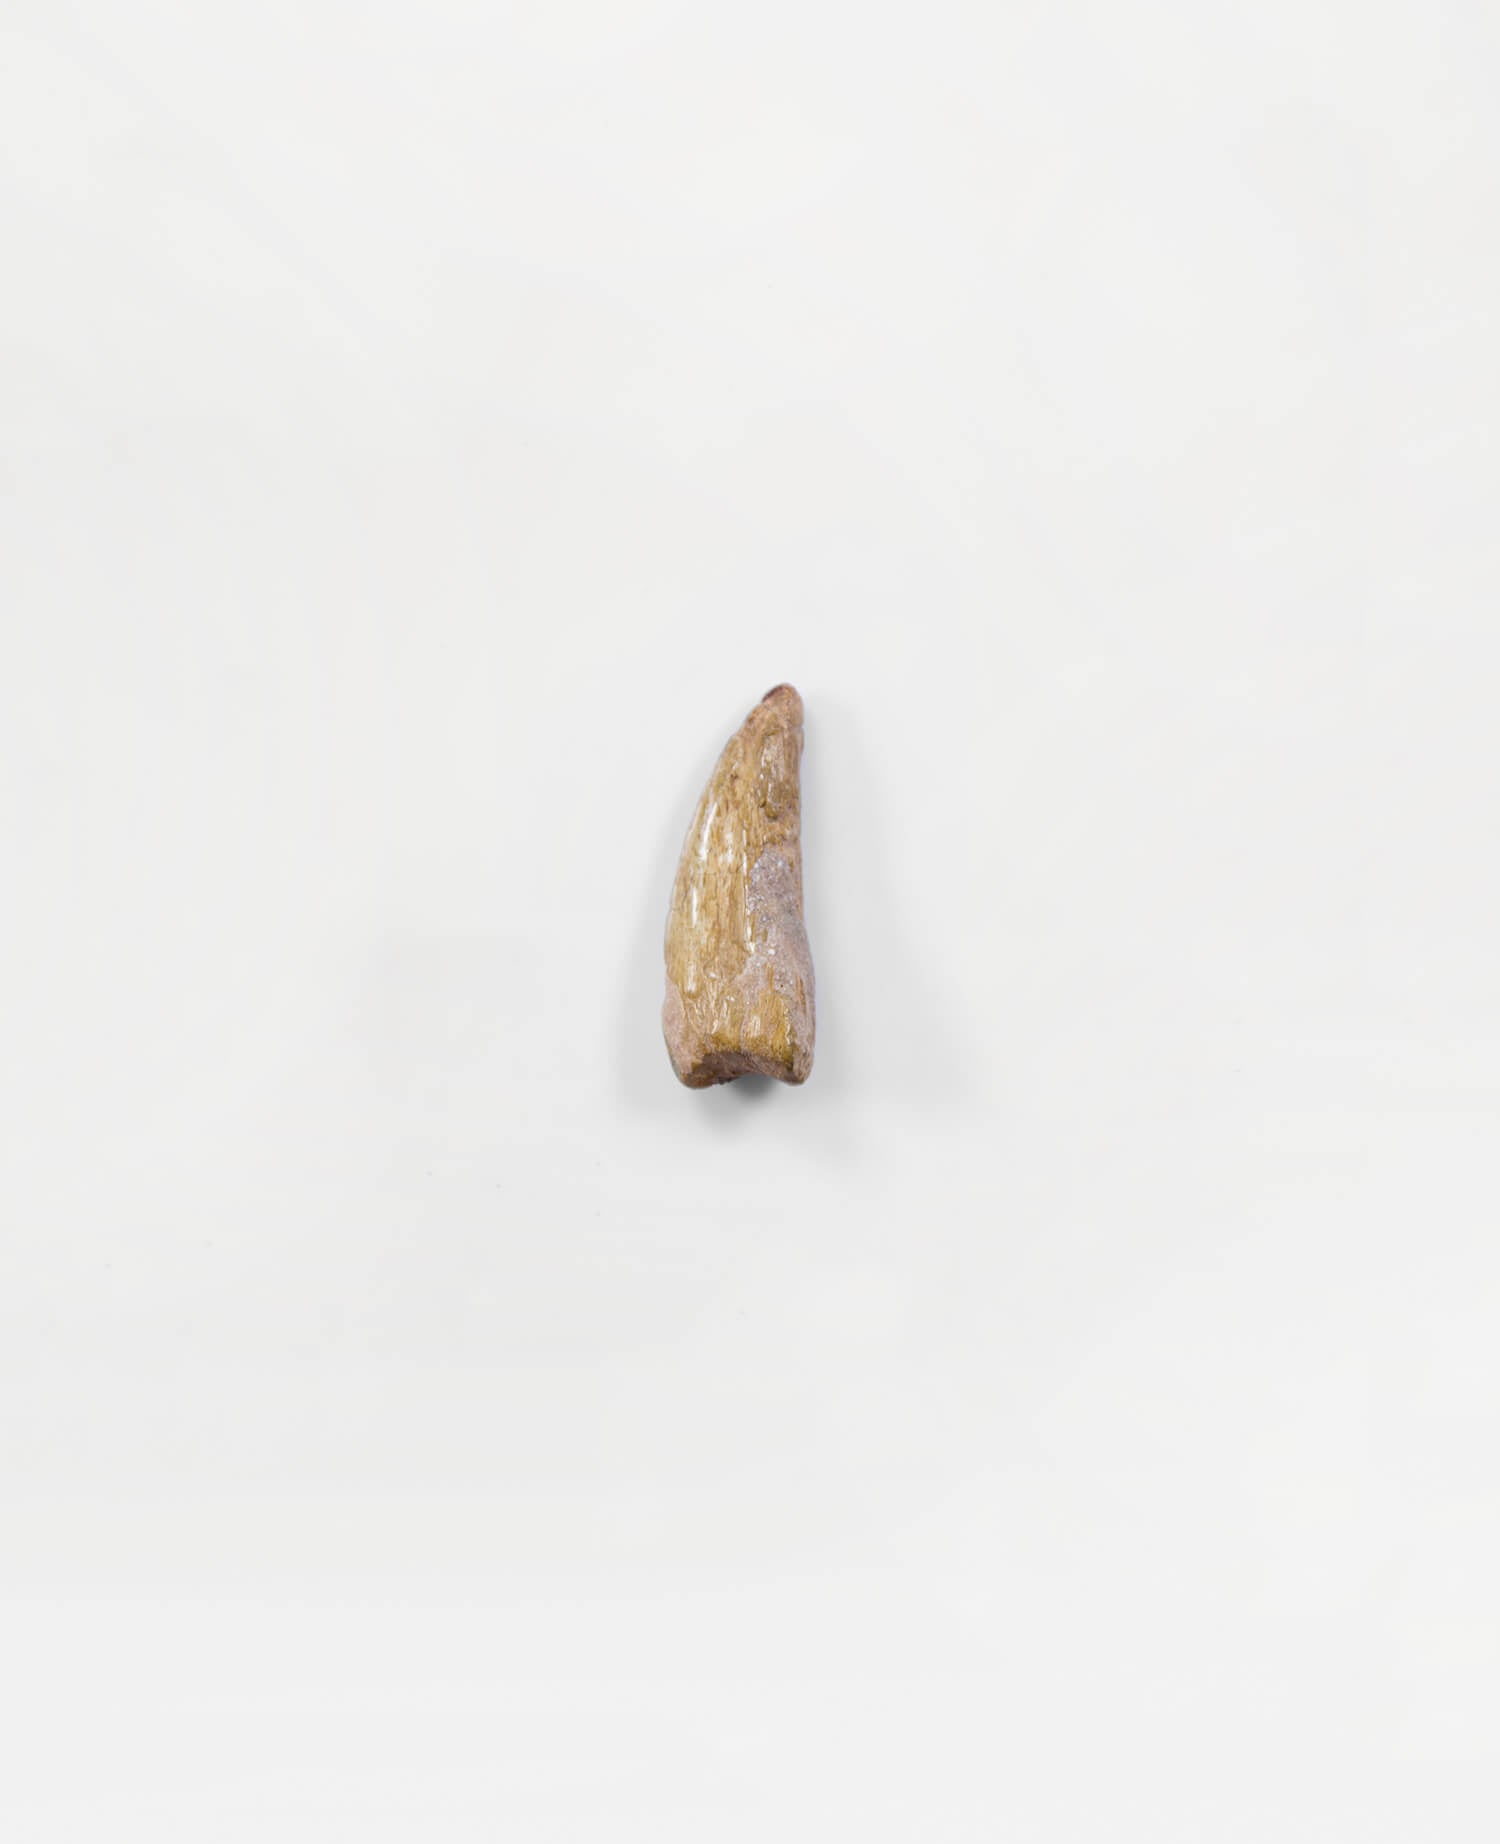 Museum-quality Carcharodontosaurus saharicus dinosaur fossil claw for sale measuring 38mm at THE FOSSIL STORE